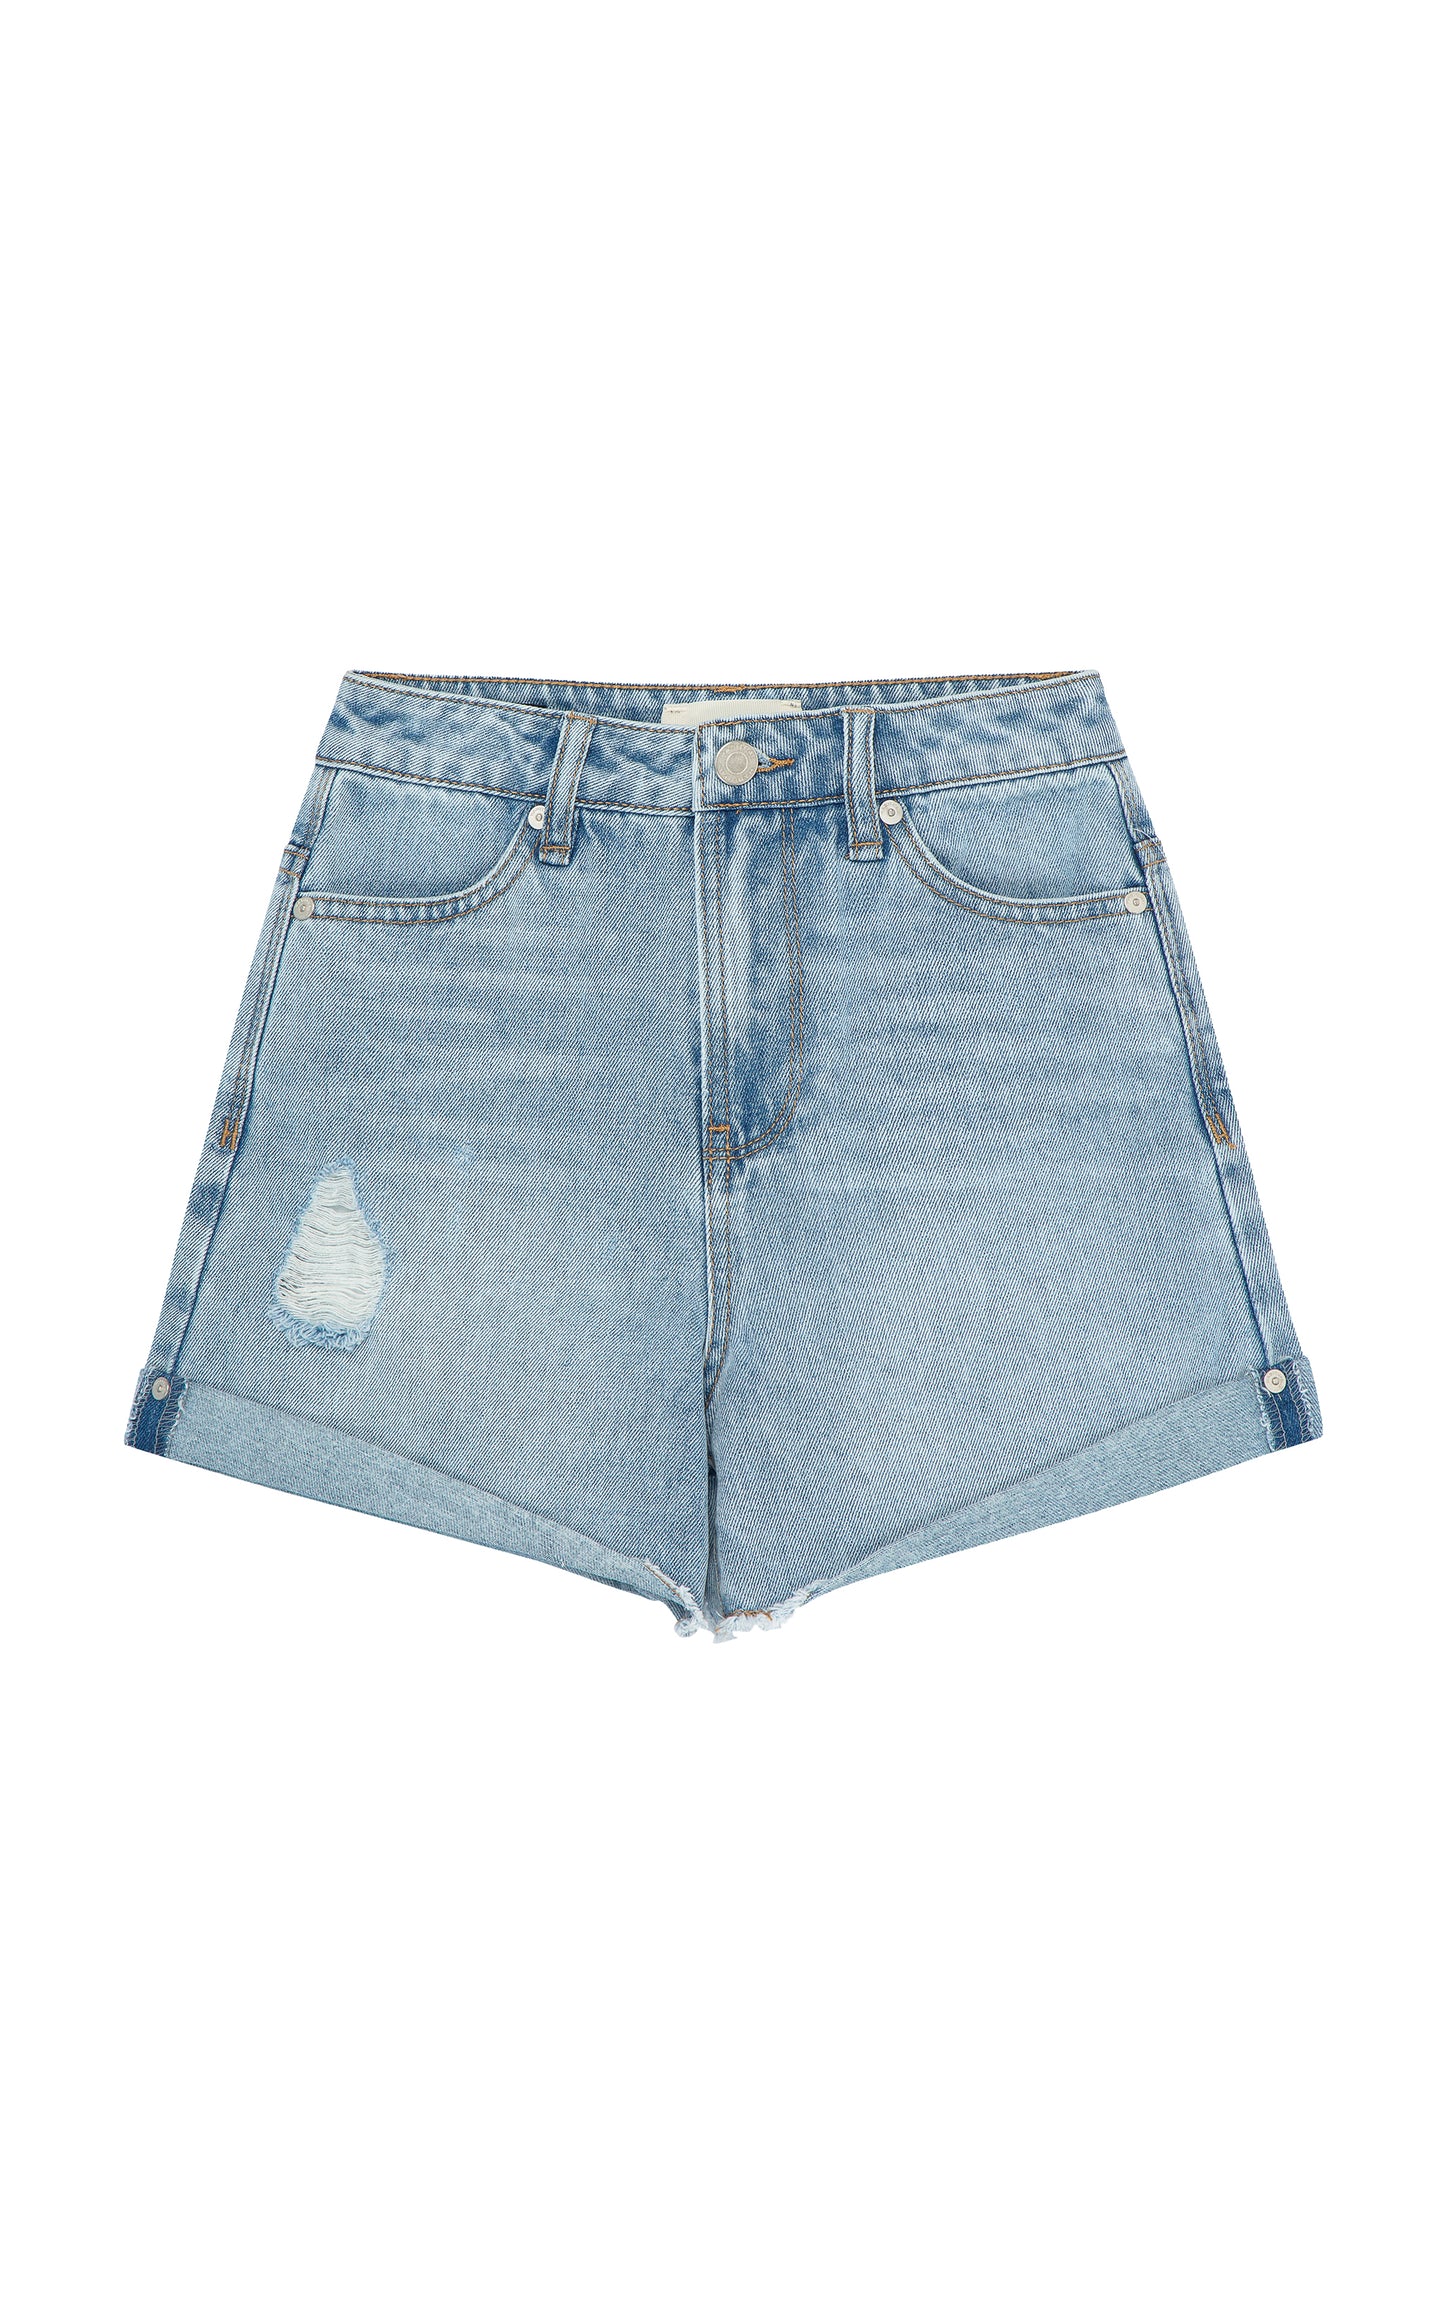 LIGHT BLUE WASH DENIM CUT OFF SHORTS WITH ROLLED HEM AND SLIGHT DISTRESSING